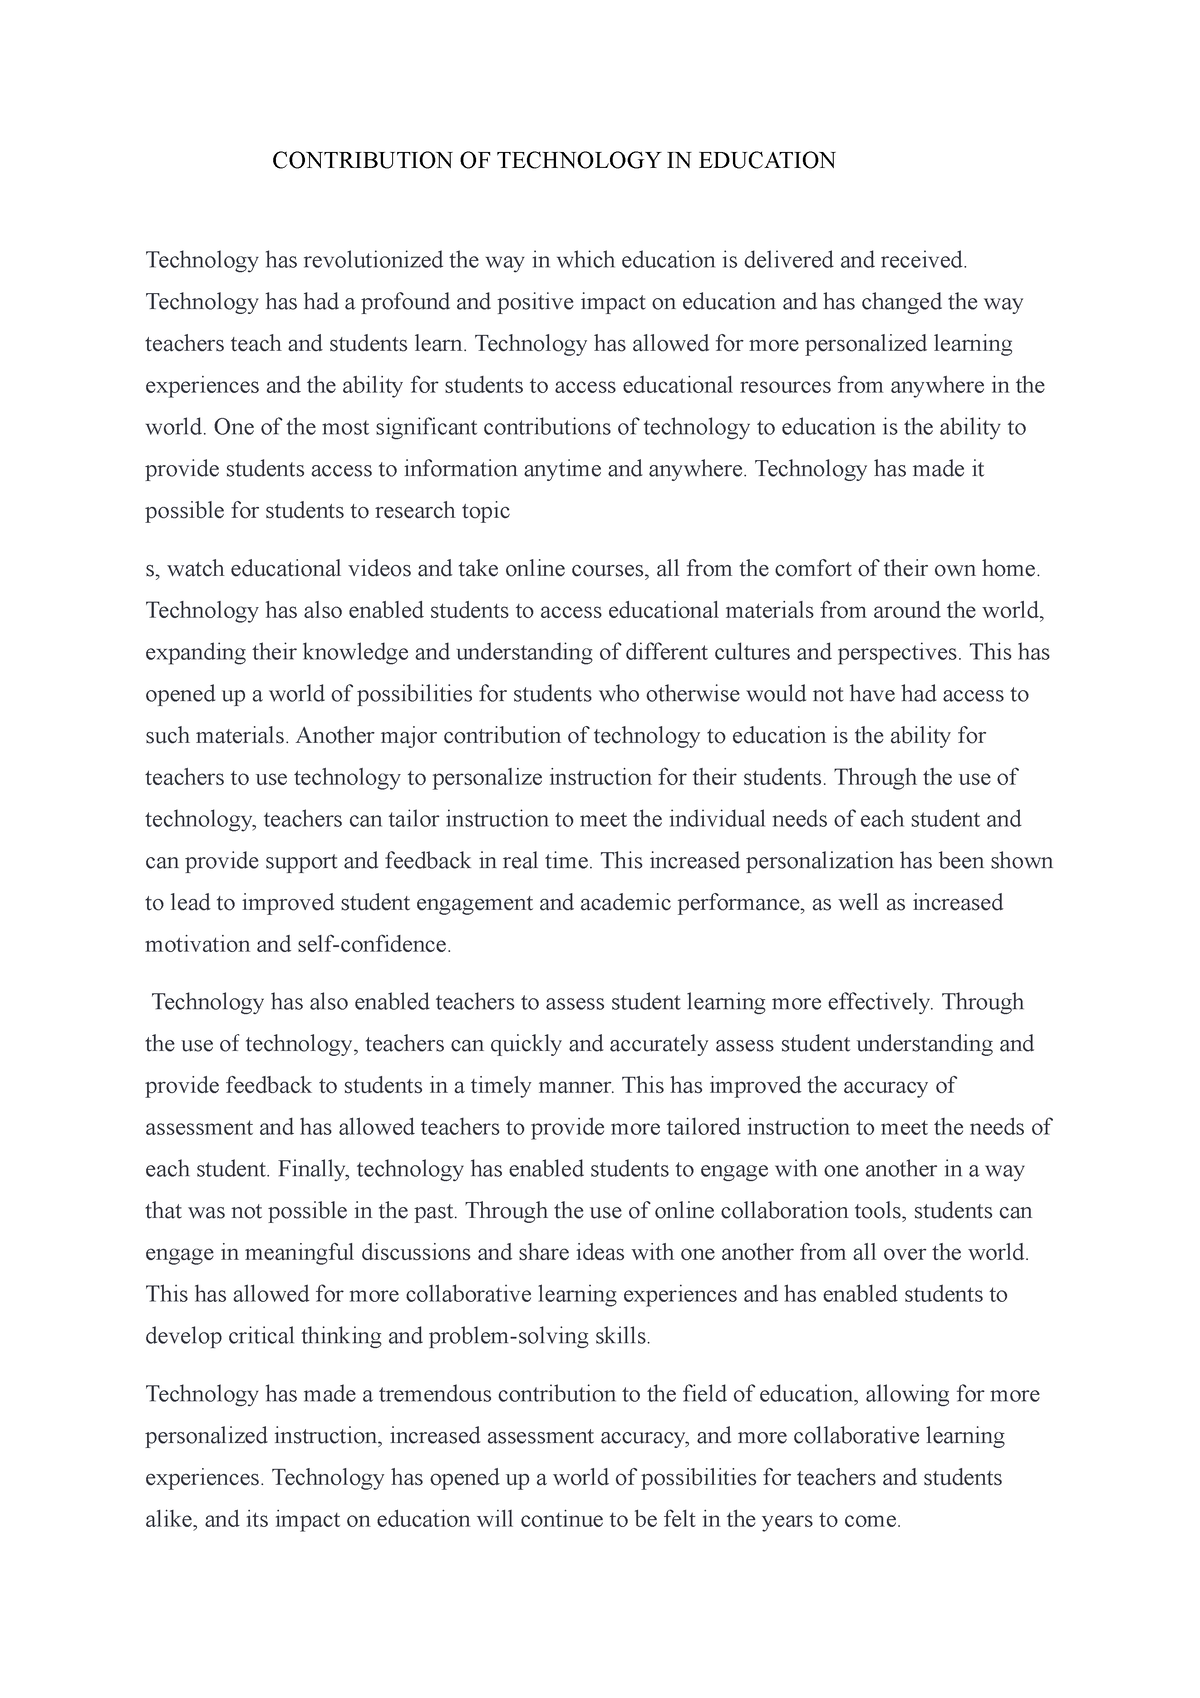 contribution of technology in education essay 300 words pdf